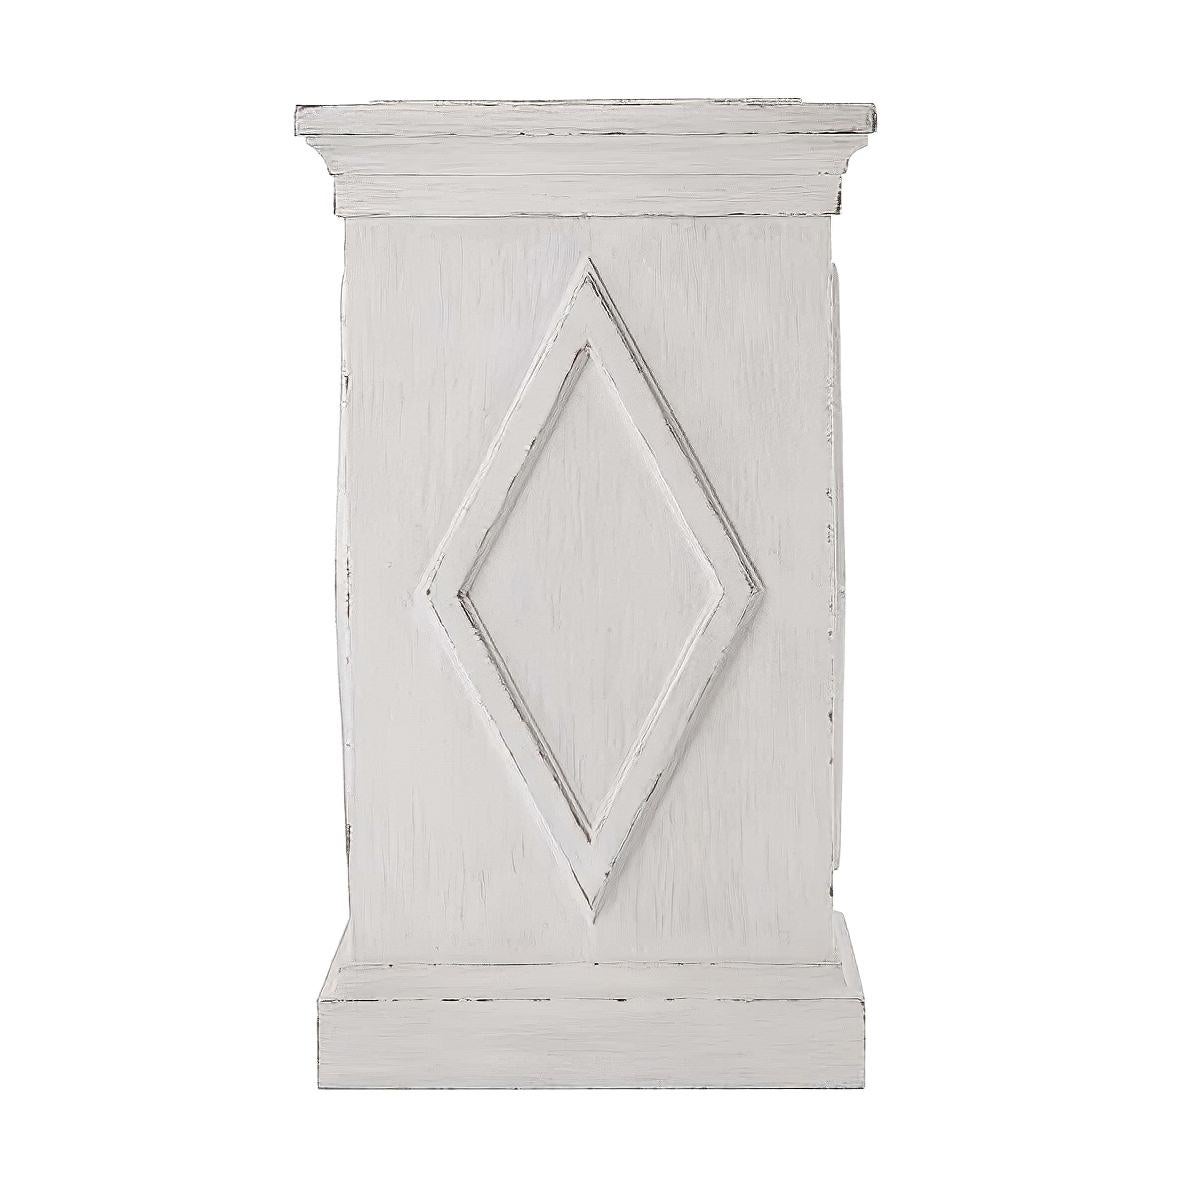 French Directoire style painted square pedestals with diamond relief applied paneling to each side with a molded edge and square plinth base.

Dimensions: 14